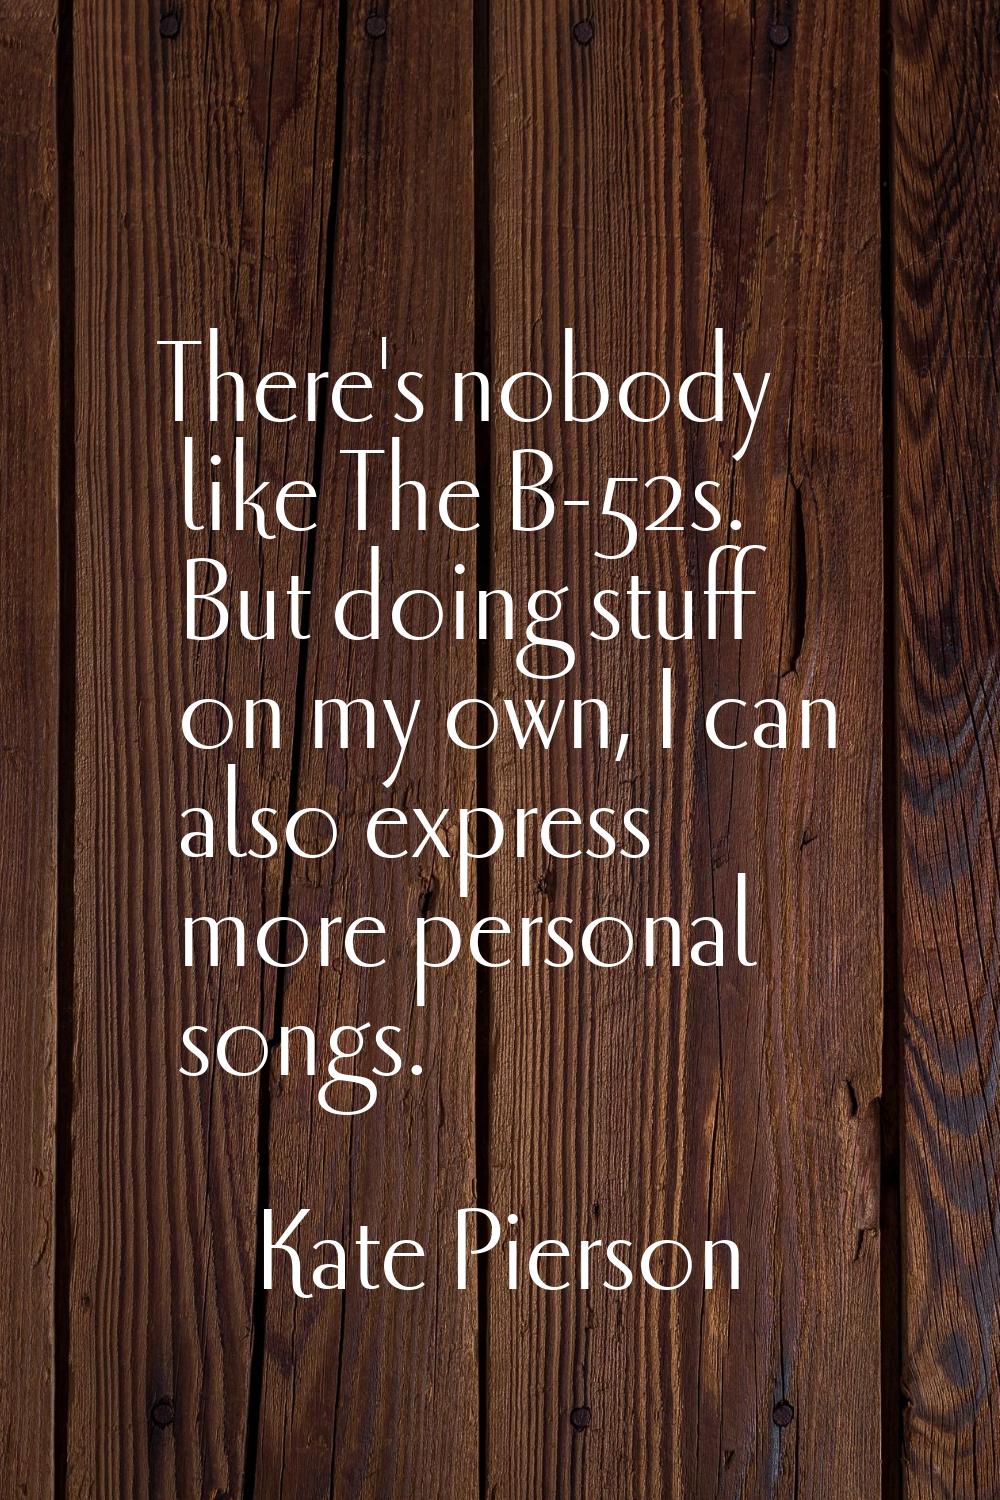 There's nobody like The B-52s. But doing stuff on my own, I can also express more personal songs.